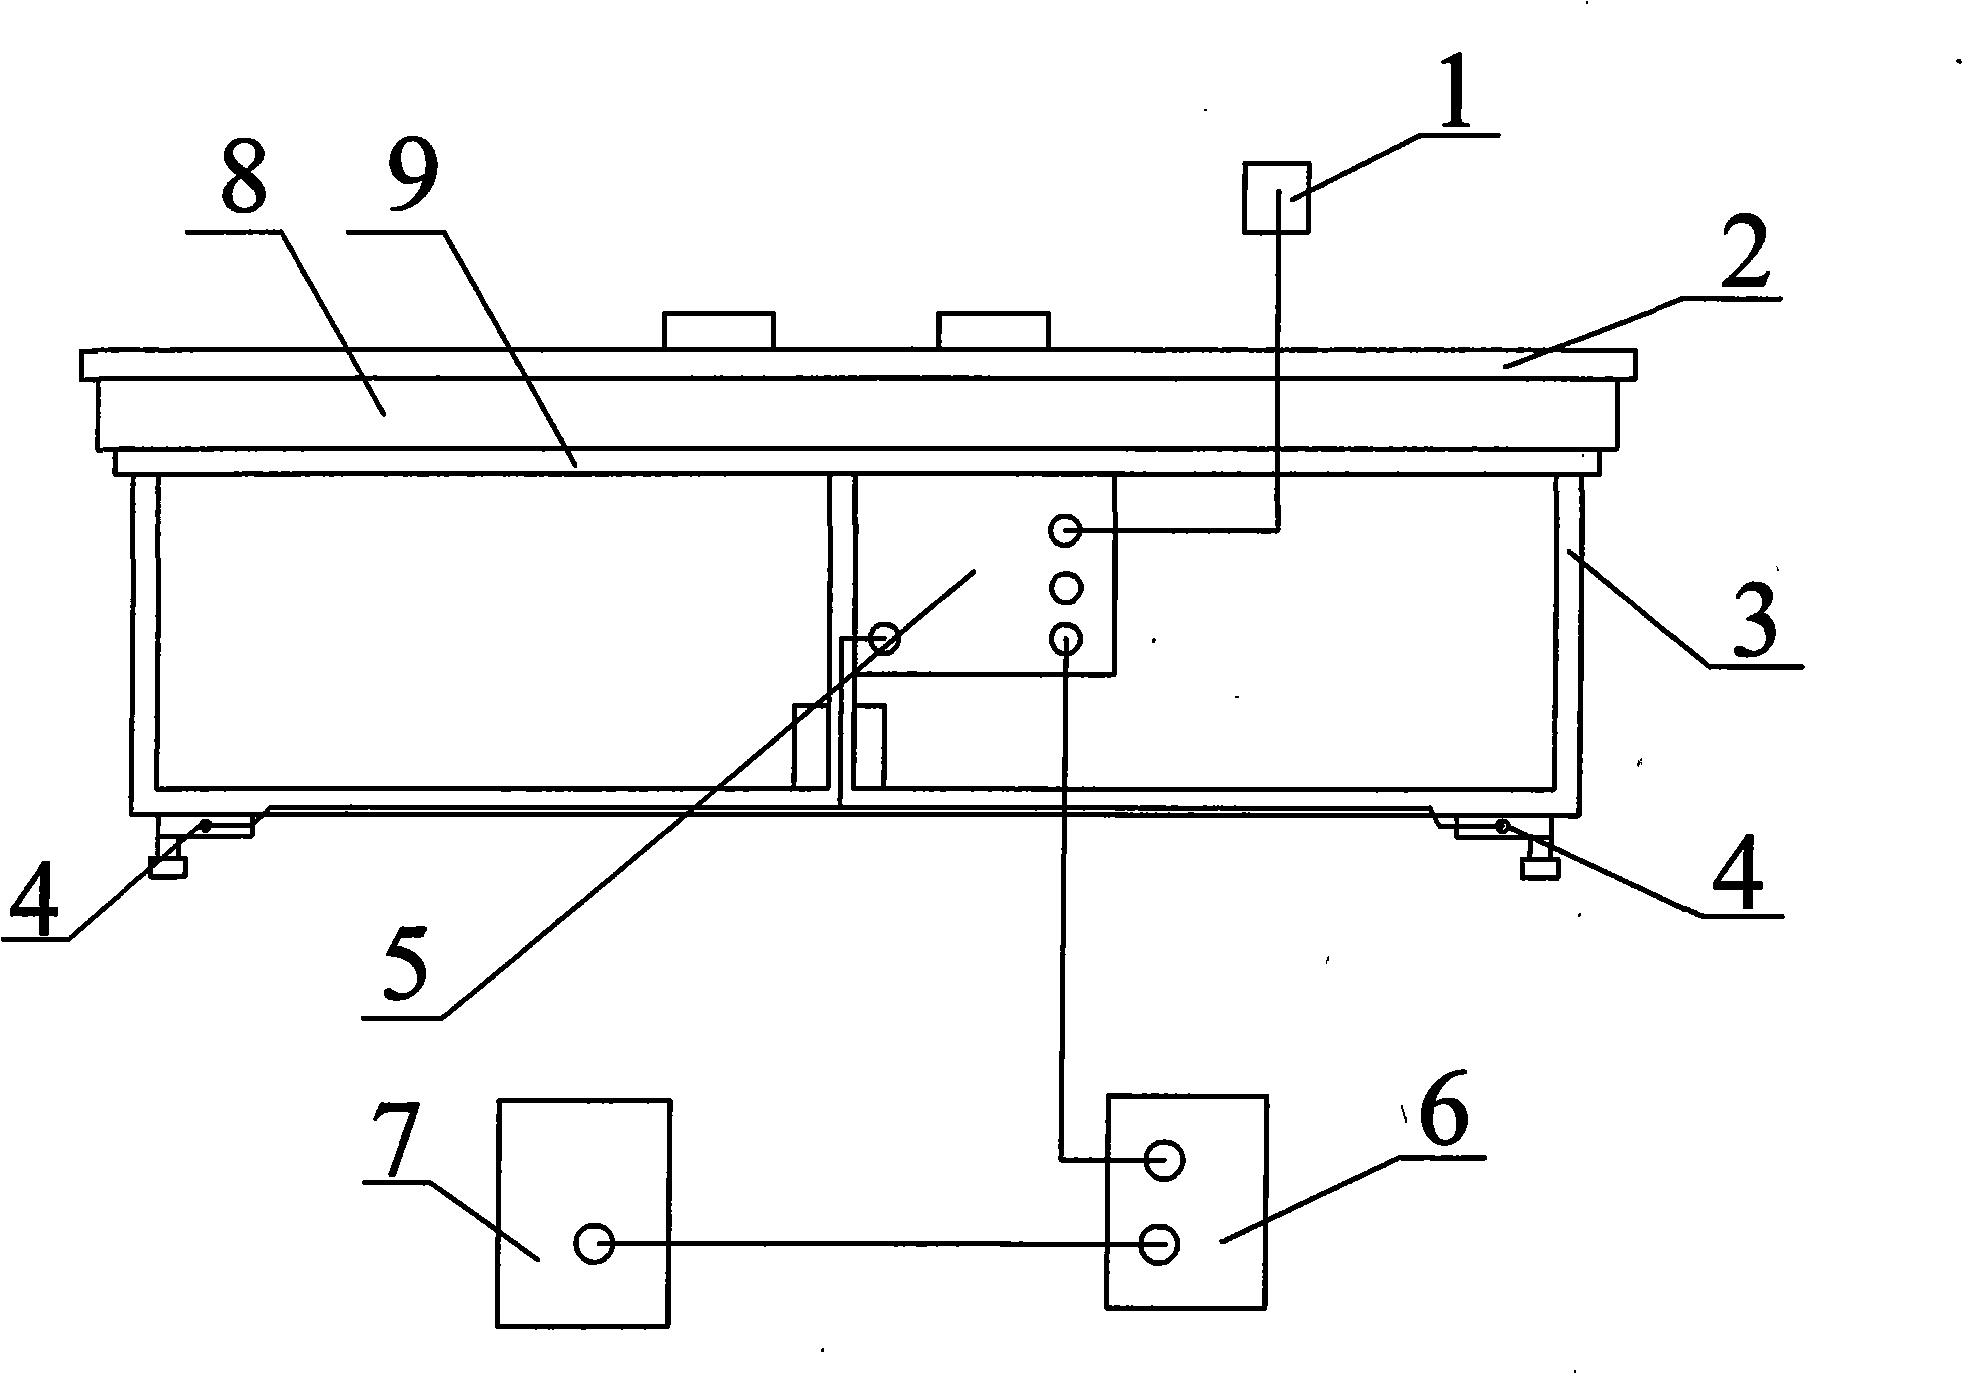 Electronic weighing system